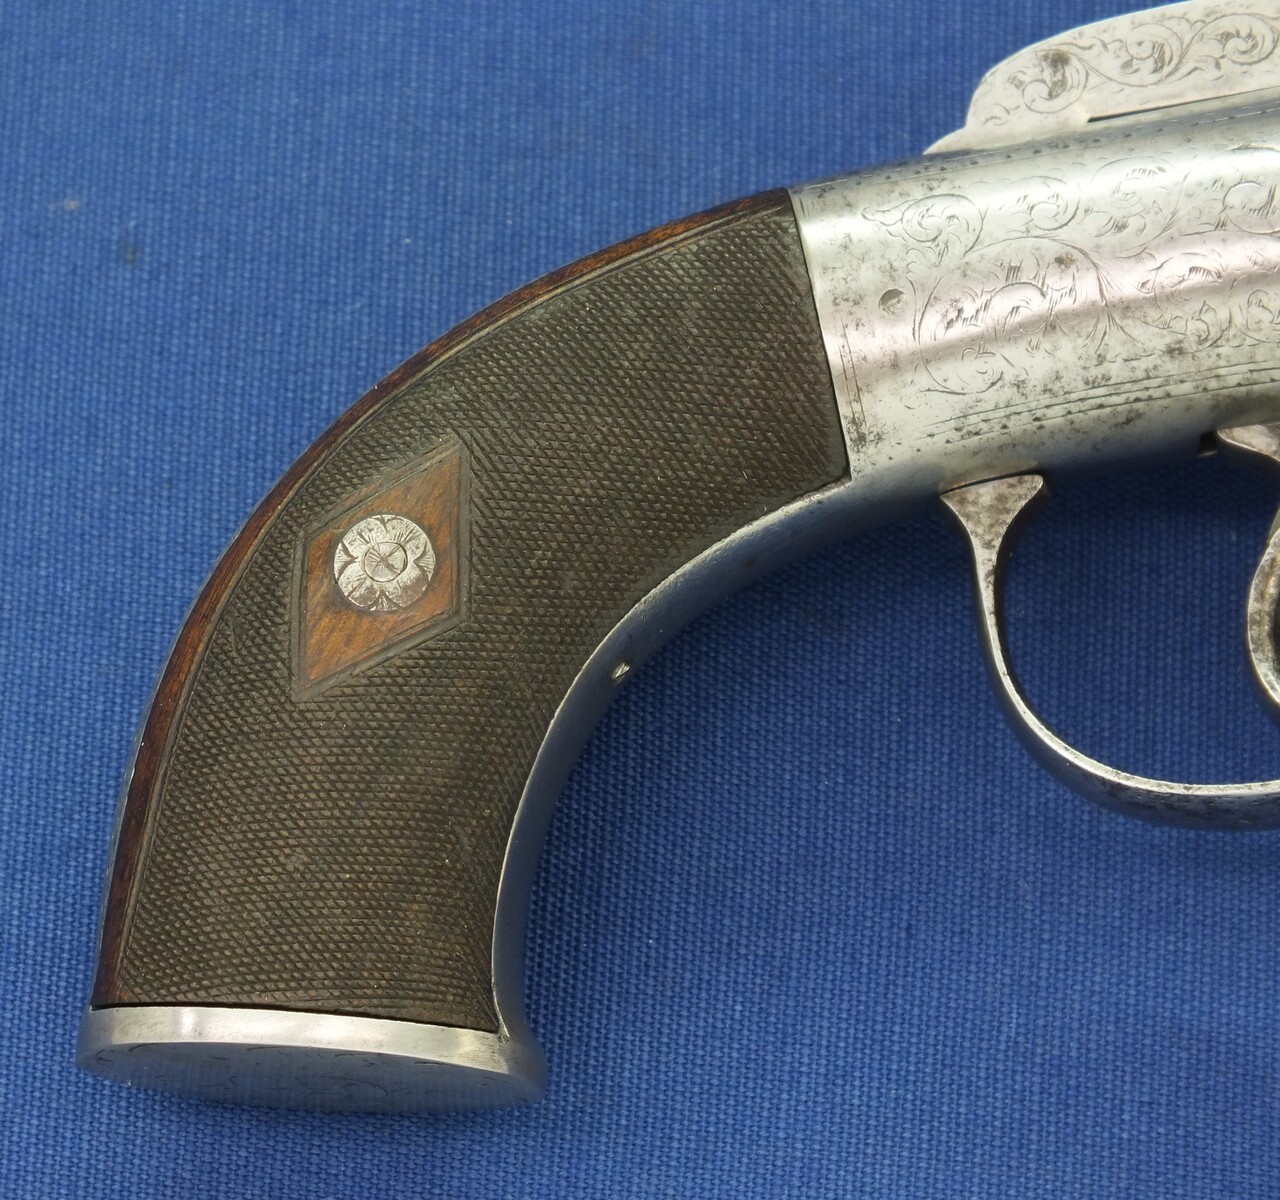 An English Transitional 6 shot double action Percussion Revolver. 6-3/4 inch octagonal barrel. Length 35cm. In good/very good condition. Price 795 euro.